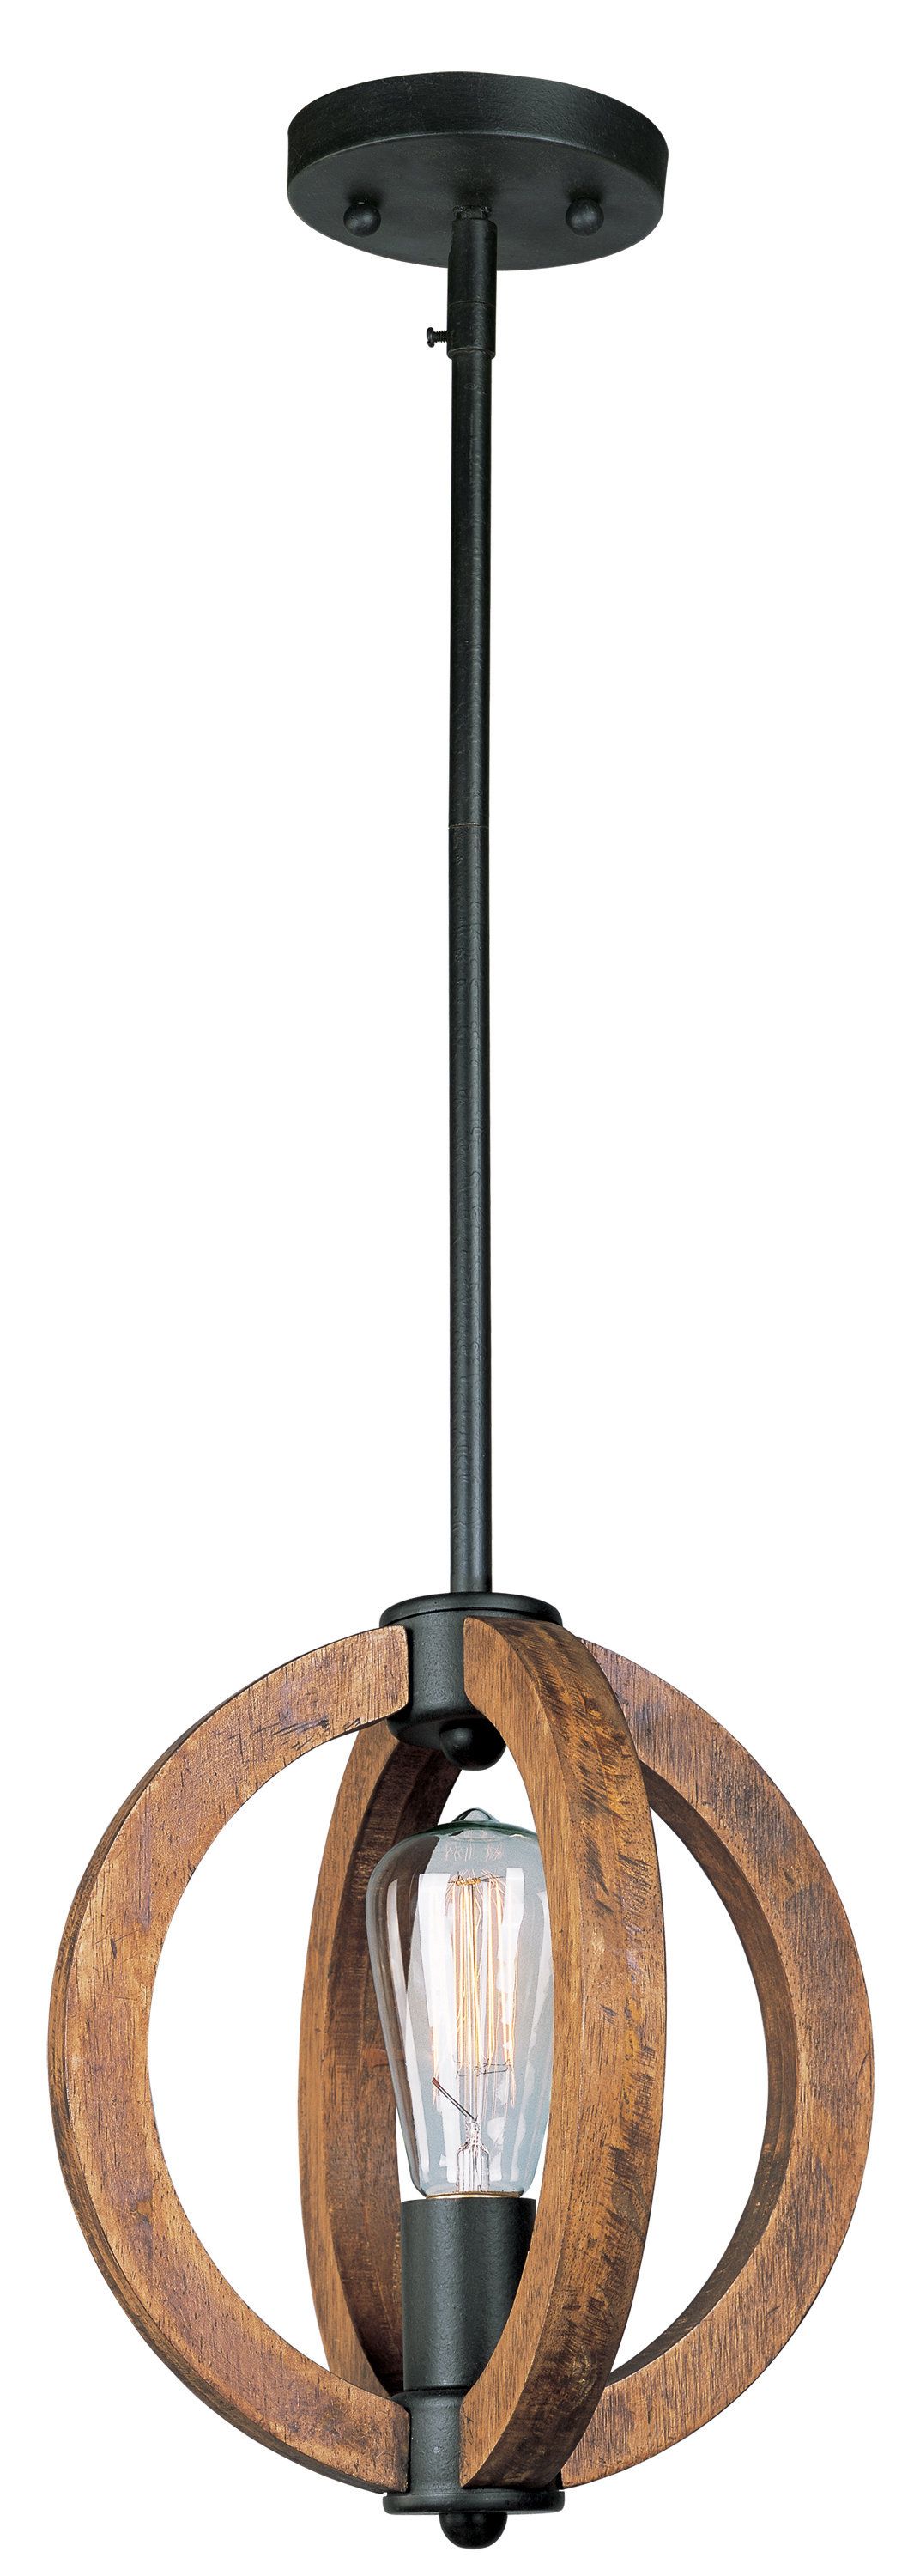 Orly 1 Light Single Globe Pendant Within Most Recently Released Irwin 1 Light Single Globe Pendants (View 12 of 25)